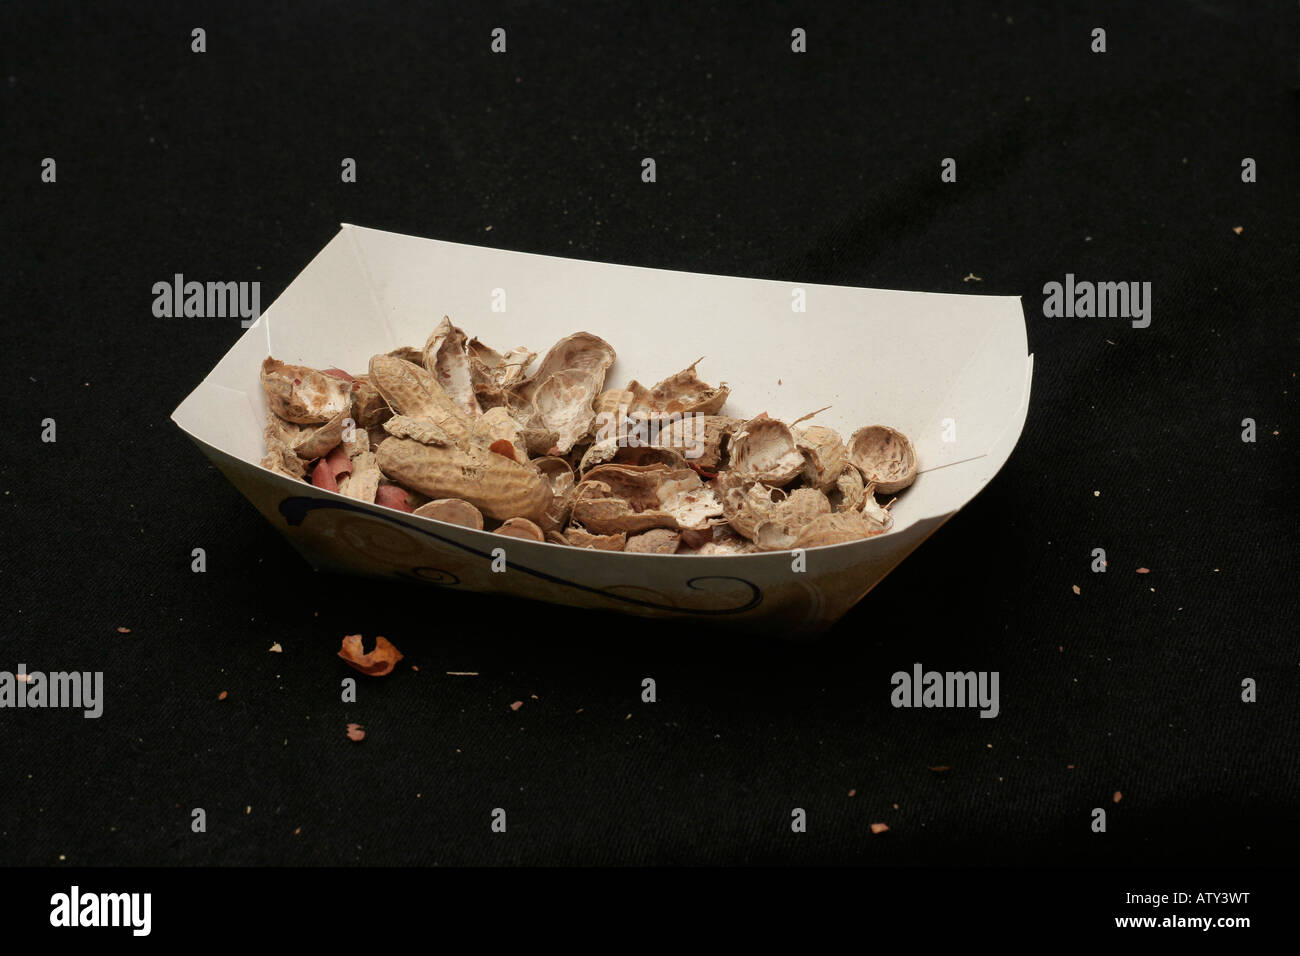 Paper tray of peanut shells after consuming the nuts Stock Photo